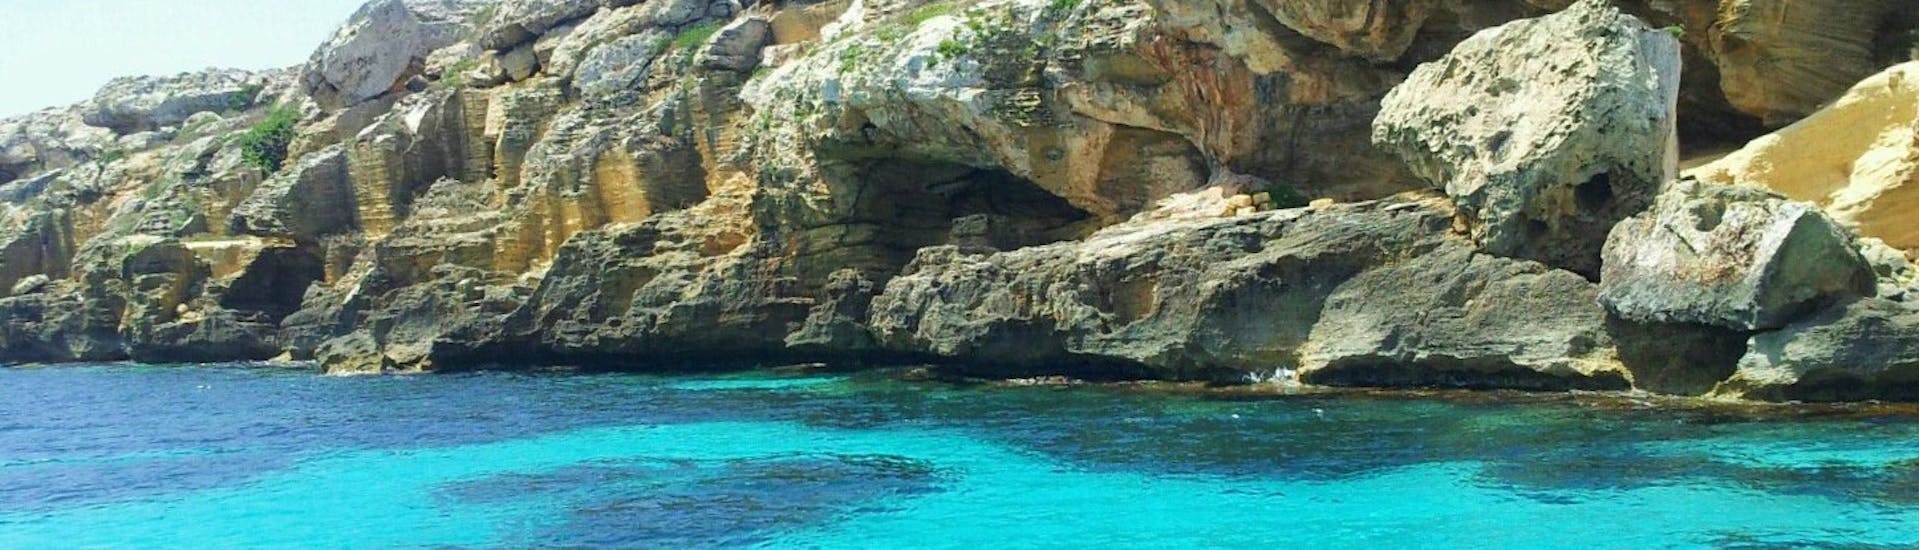 Photos of Favignana's beautiful coastline during a boat trip around Favignana with lunch with In barca con Salvo.